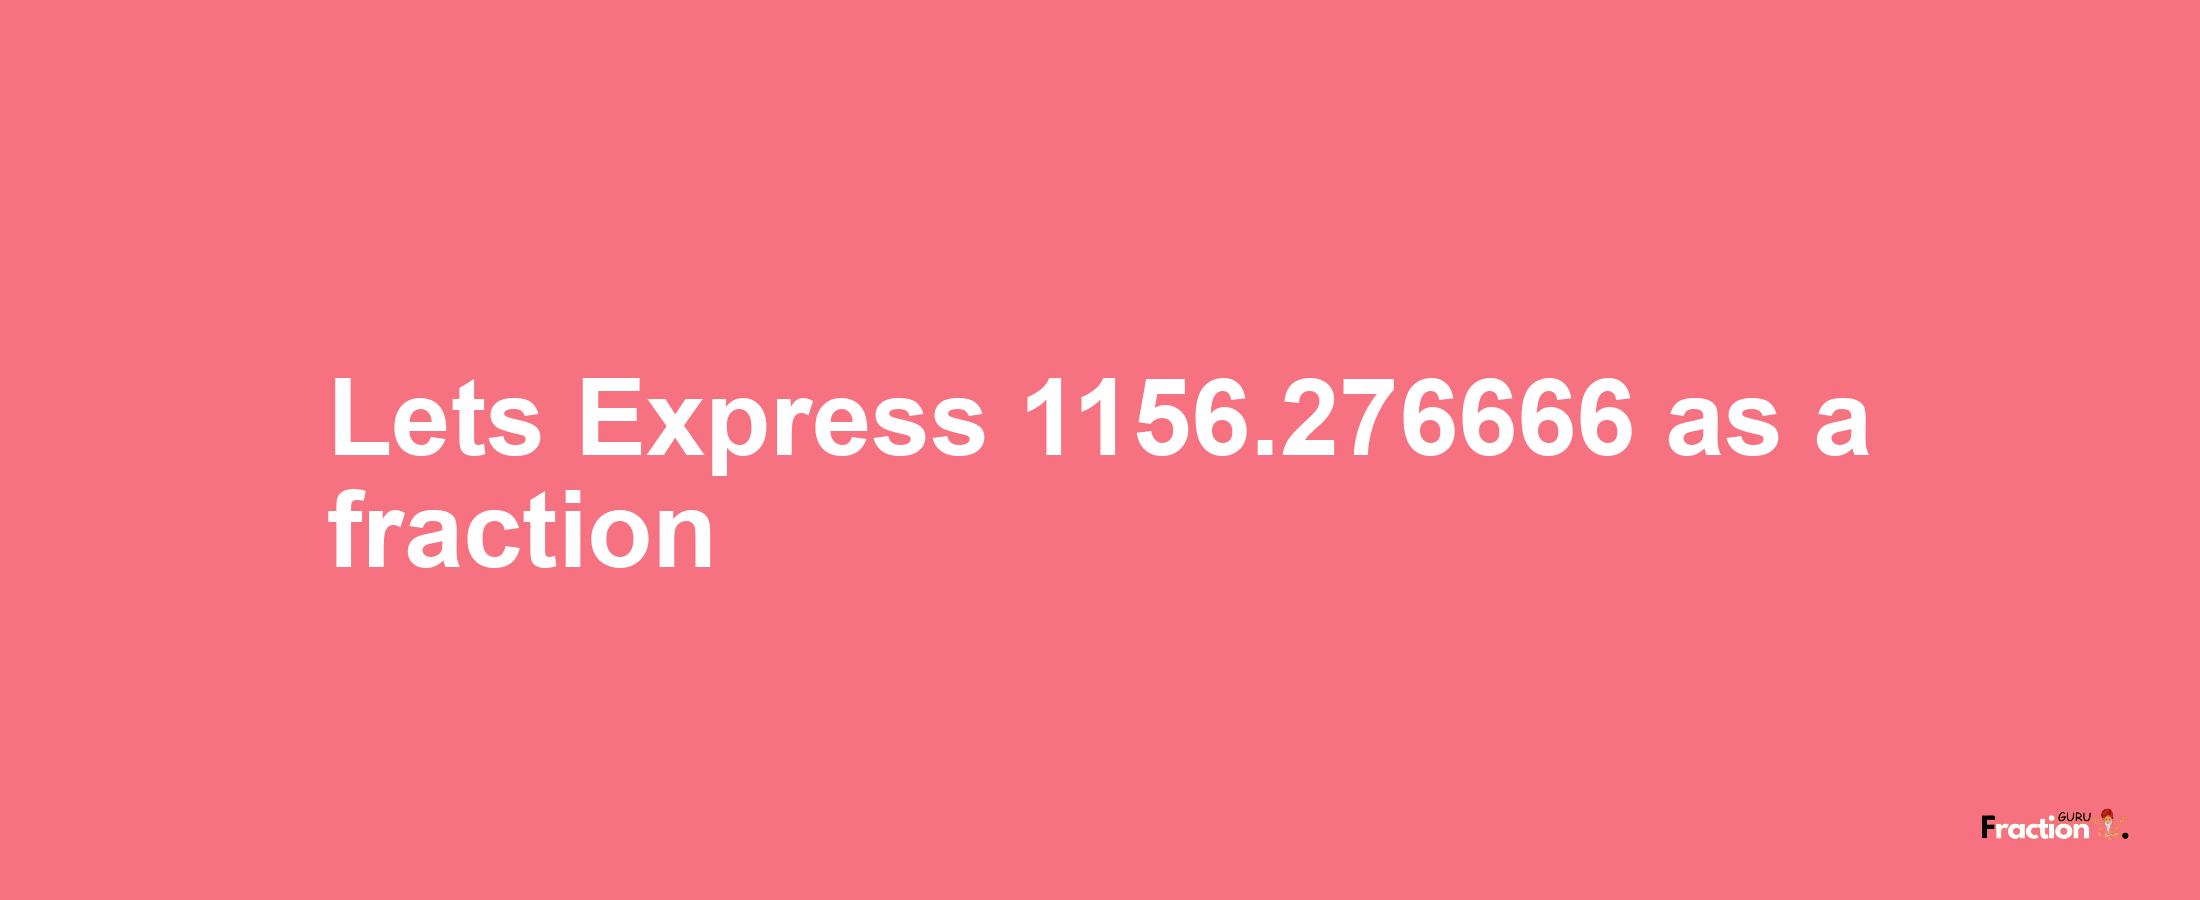 Lets Express 1156.276666 as afraction